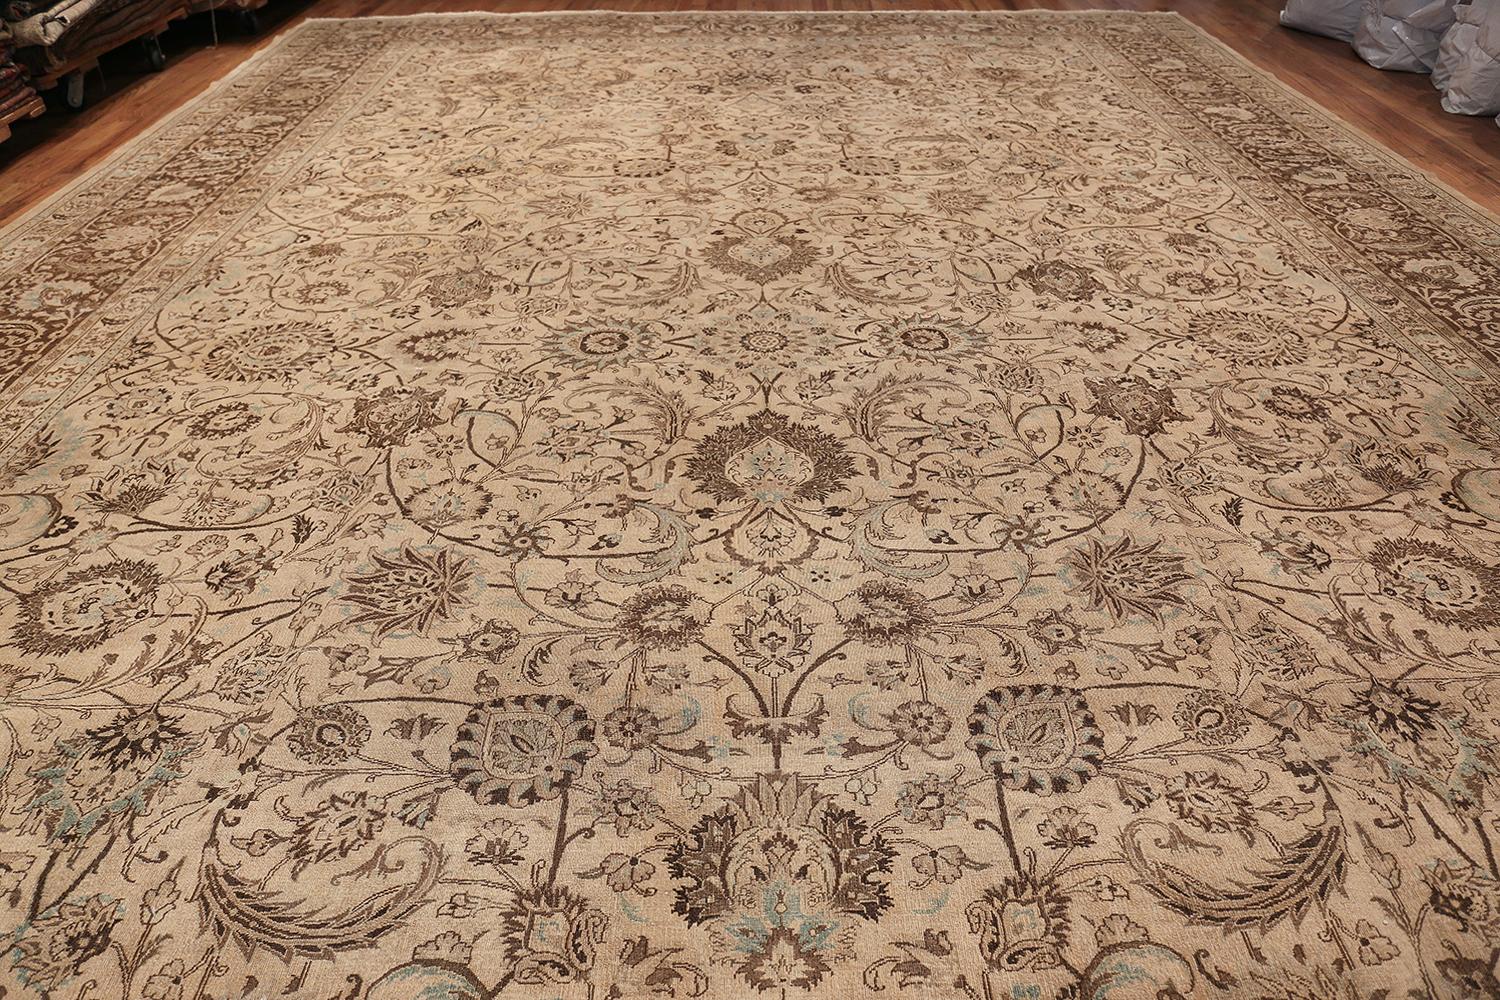 Beautifully decorative cream brown antique oversized Persian Khorassan Rug, Country of Origin / Rug Type: Persian rugs, circa 1920s. Size: 15 ft 4 in x 23 ft 8 in (4.67 m x 7.21 m)

Subtle sky blue color accents blend beautifully with the earthy